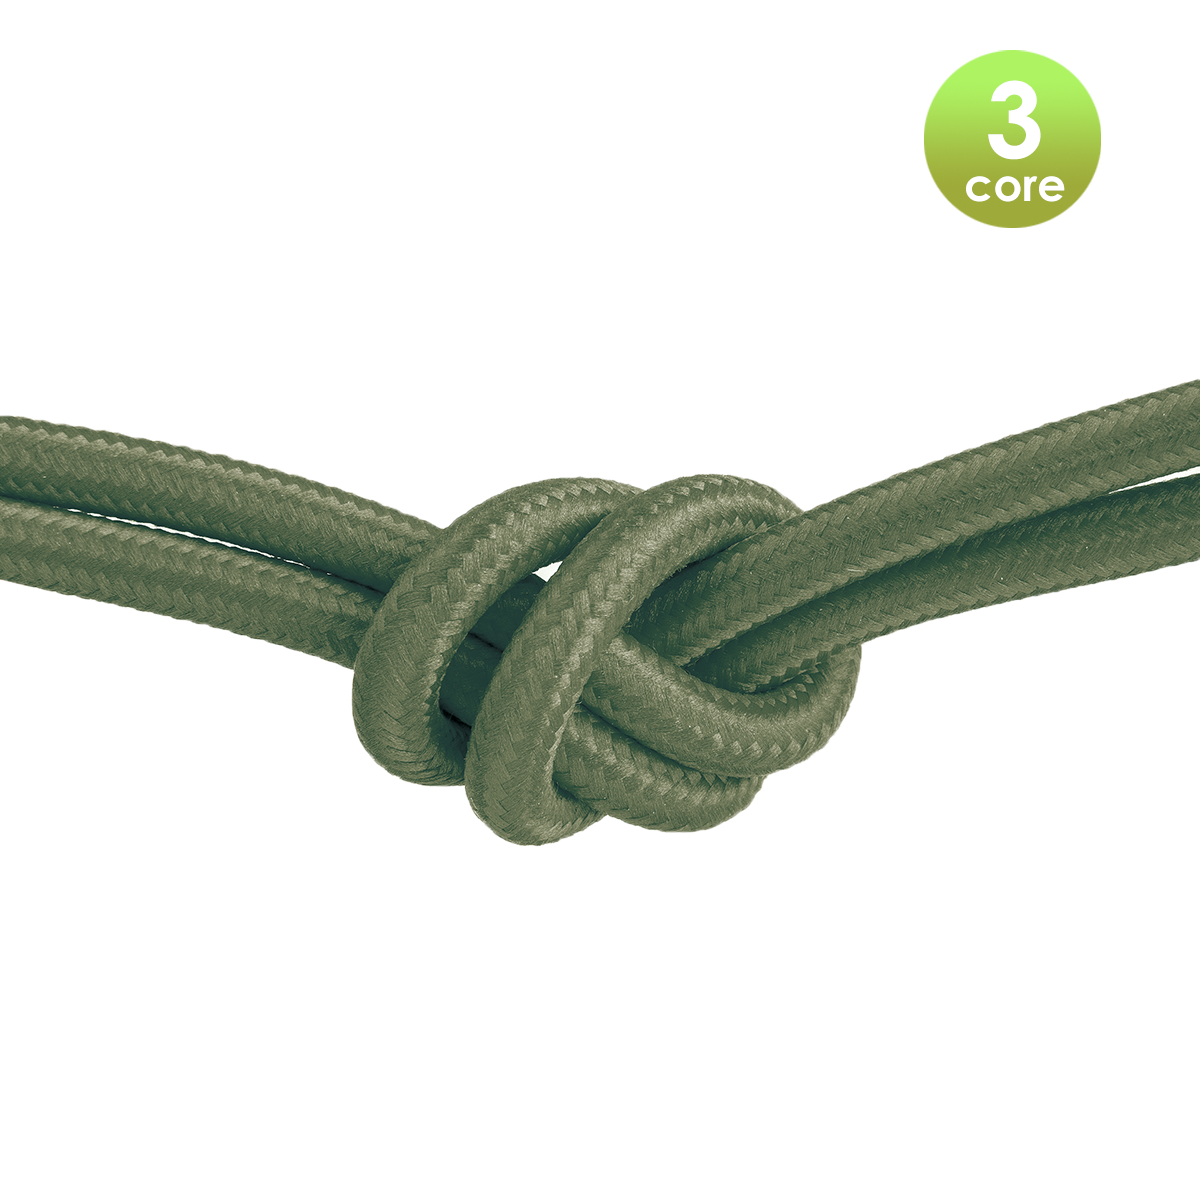 Tangla lighting - TLCB01017GN - 3c - Fabric cable 3 core - in moss green